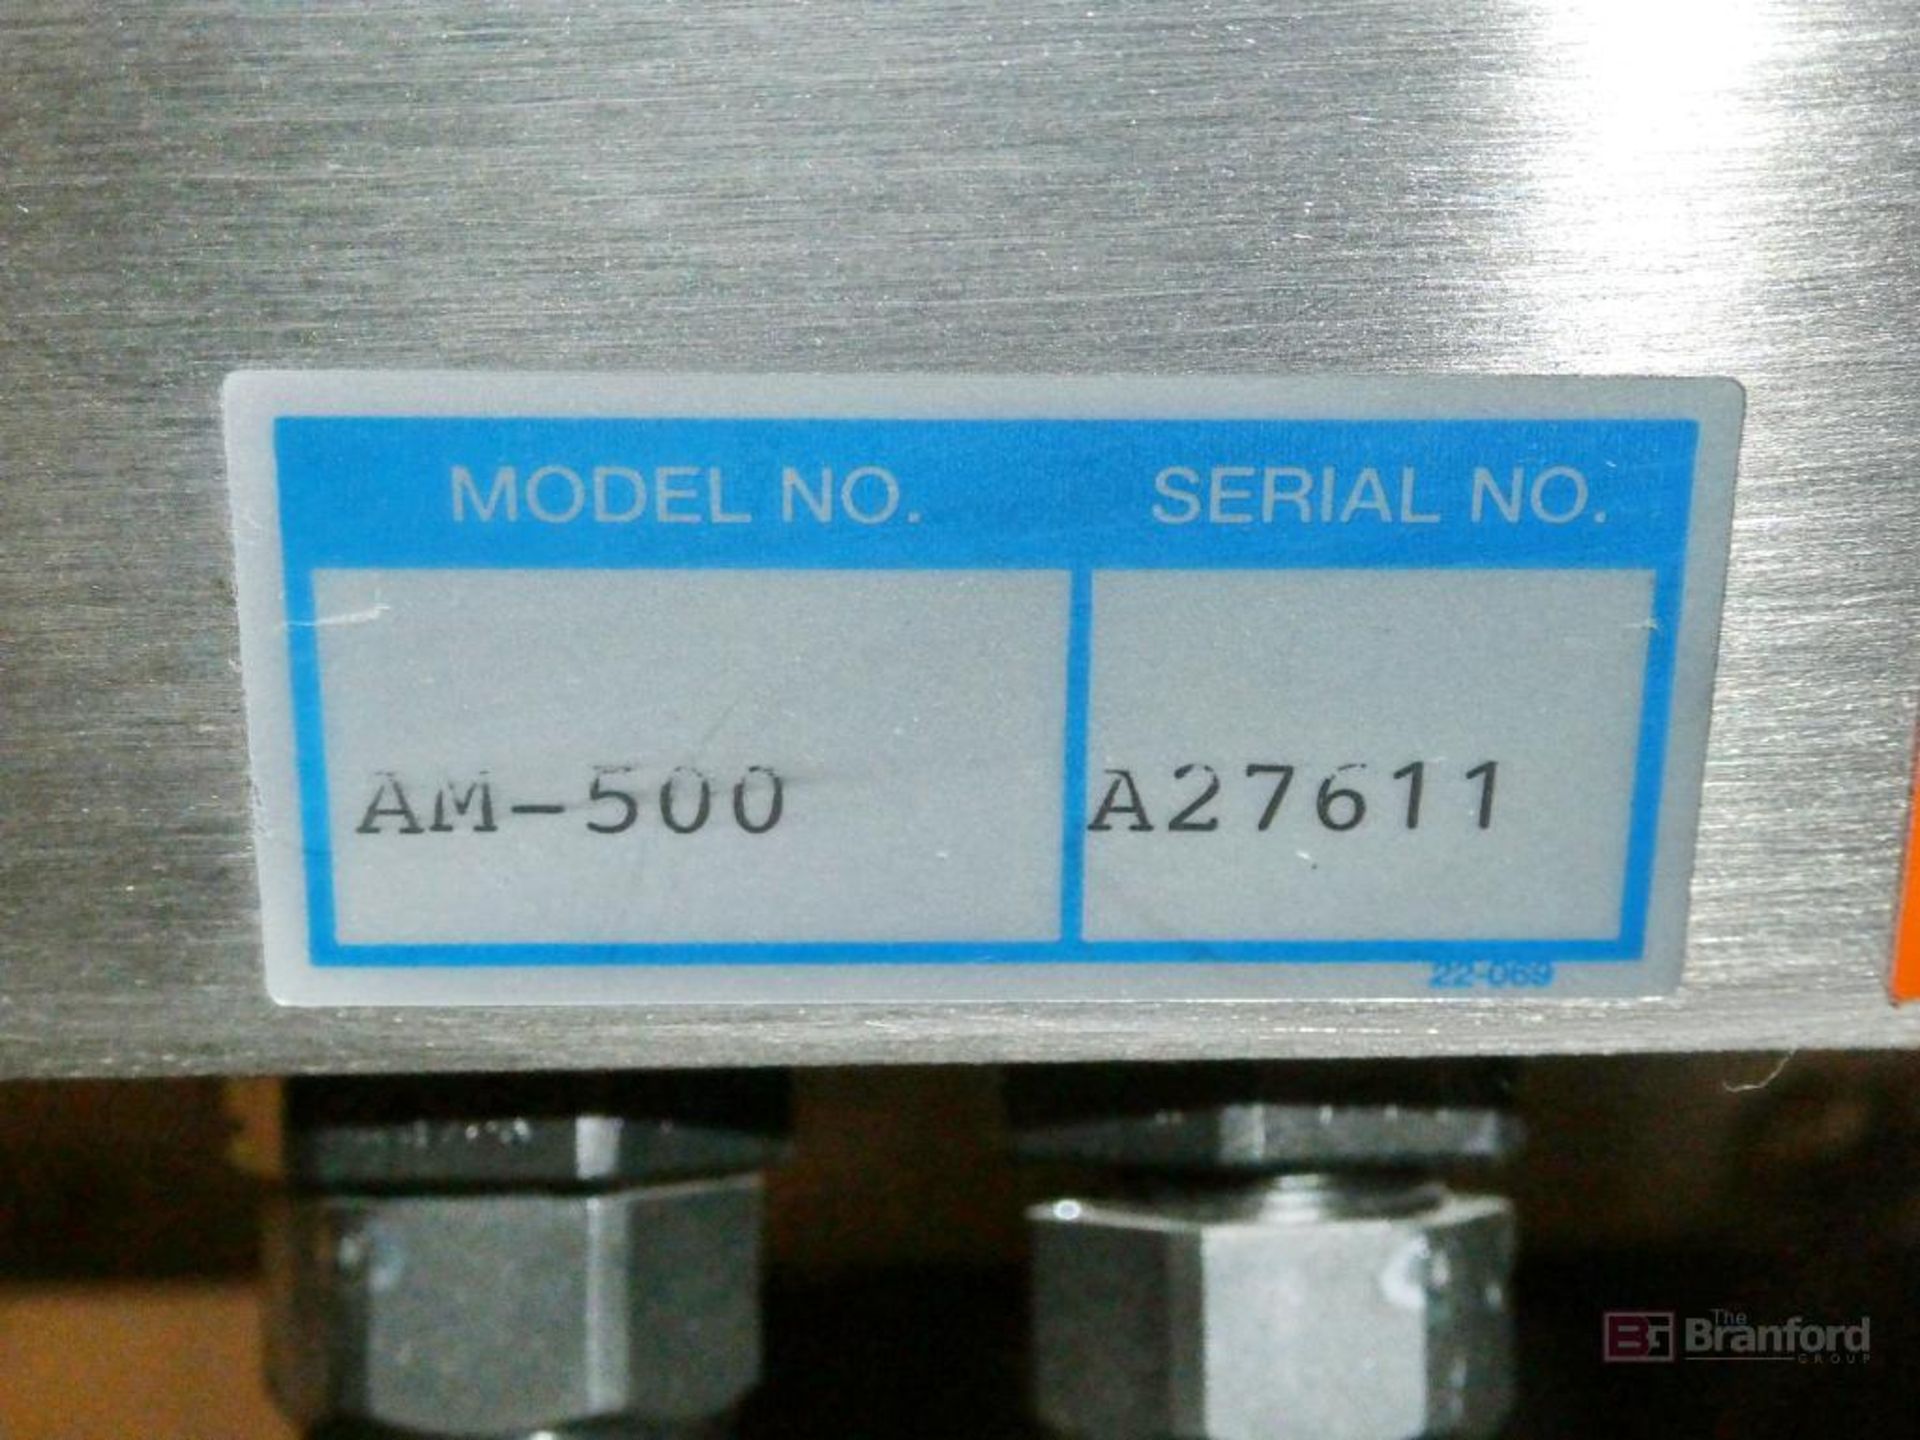 AutoMate Model AM-500, Stainless Steel High Speed Induction Sealer - Image 4 of 4